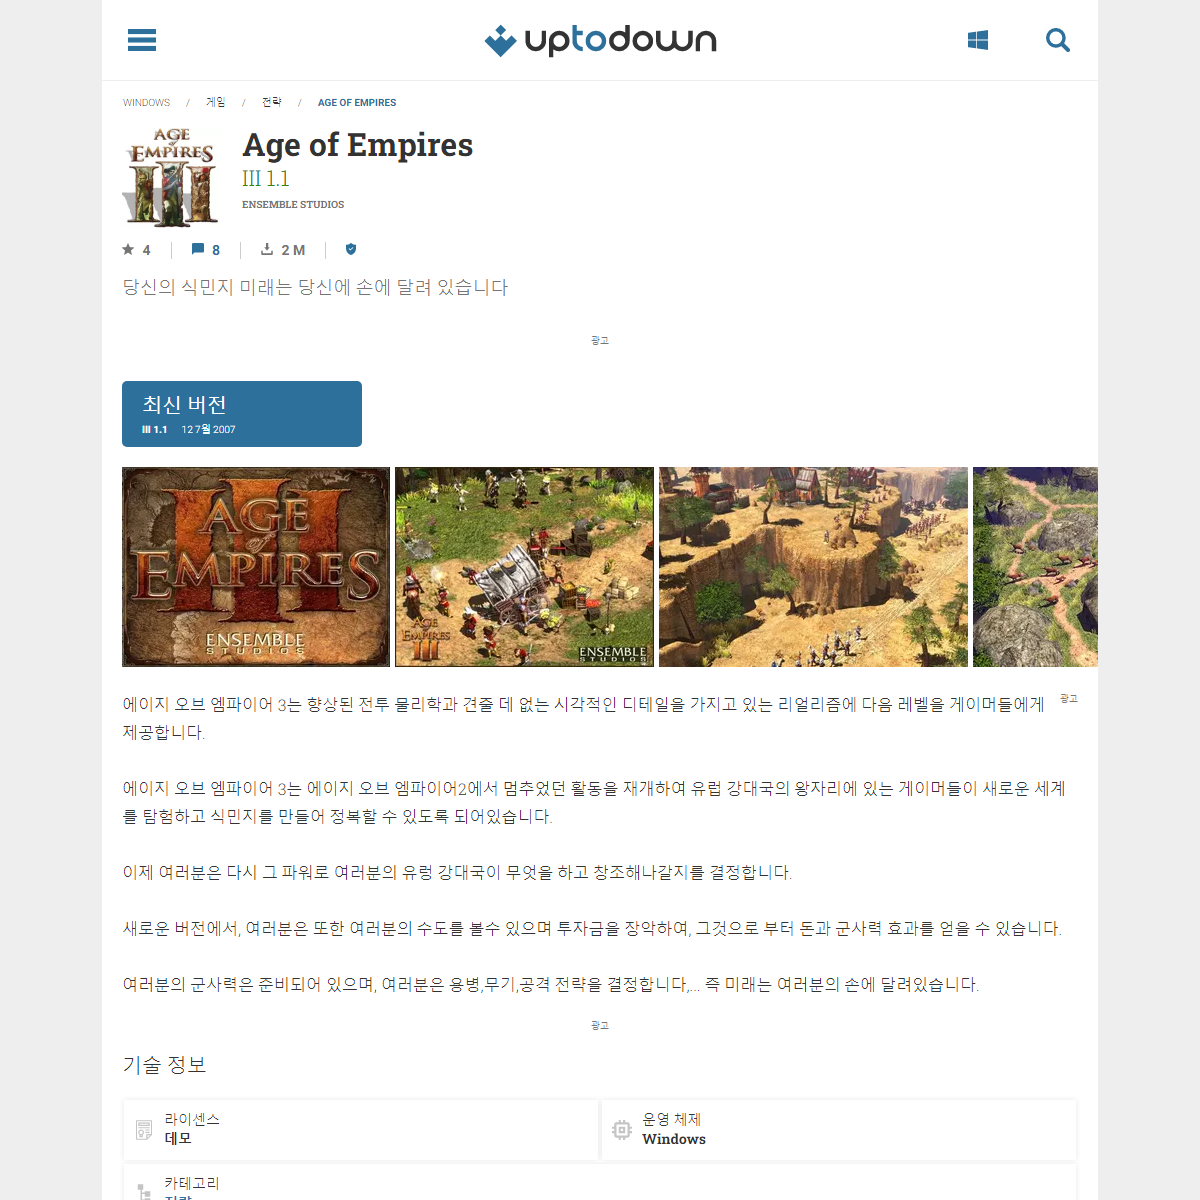 A complete backup of https://age-of-empires.kr.uptodown.com/windows